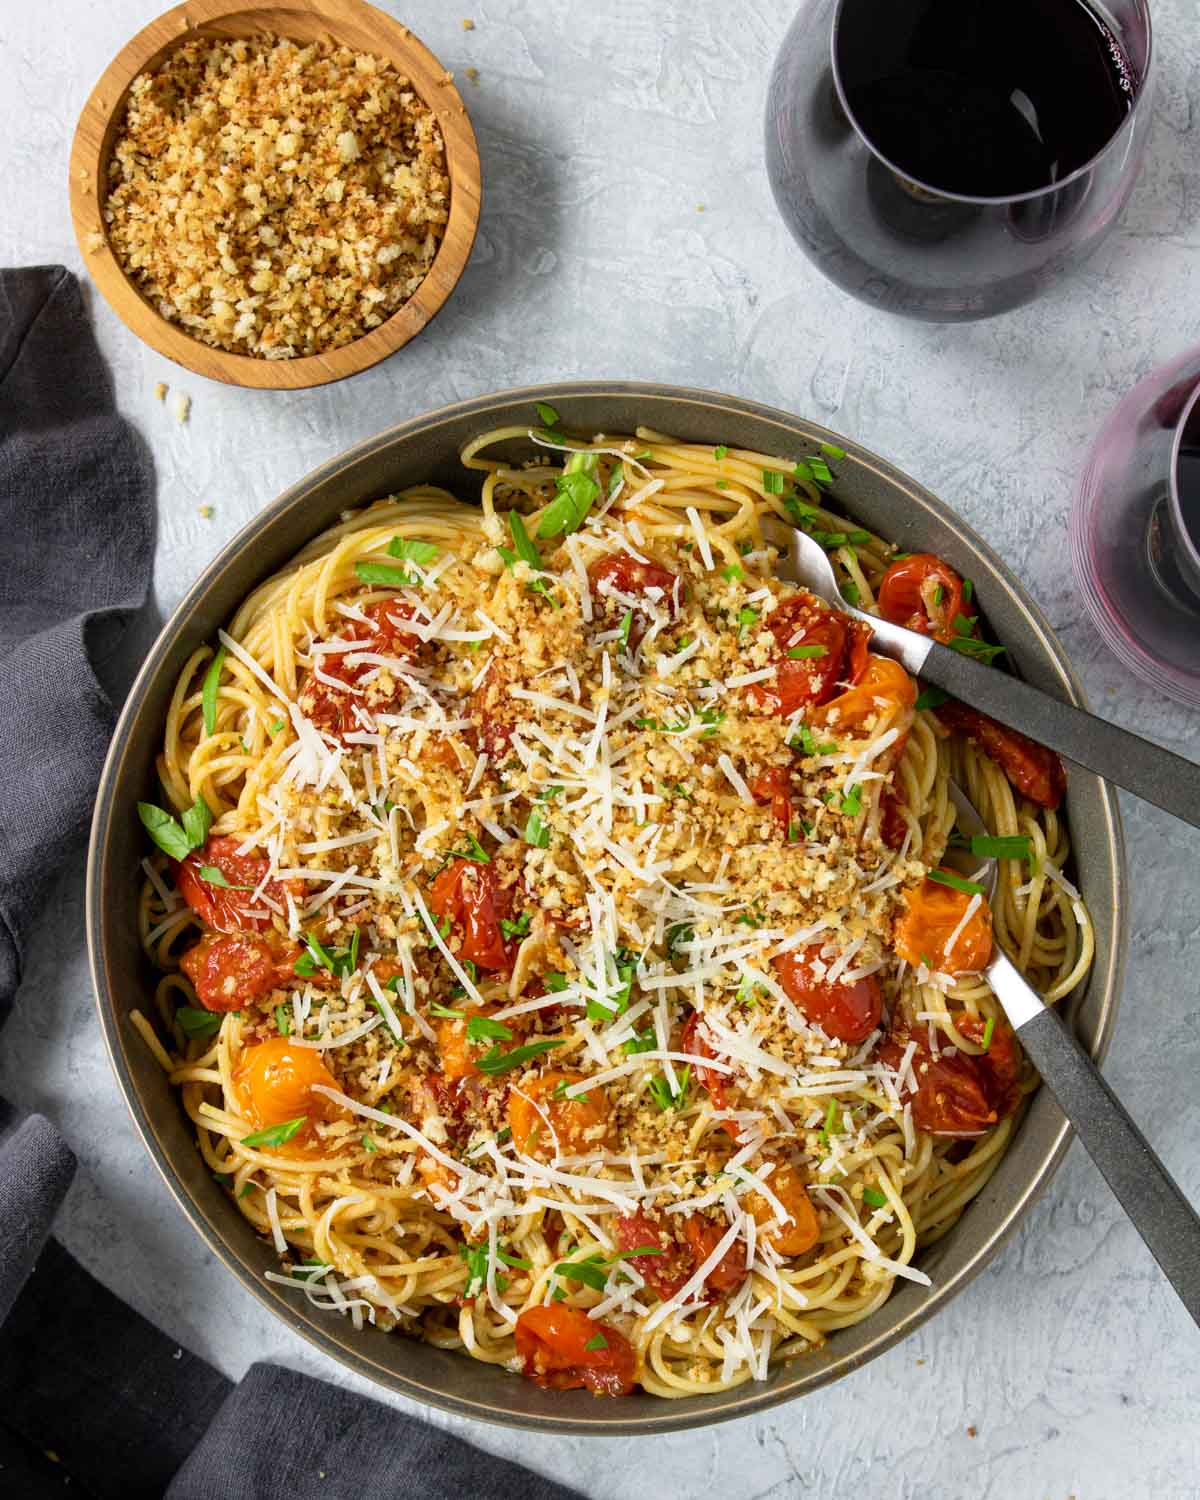 Pan Roasted Tomato Pasta in a bowl topped with bread crumbs and parmesan cheese